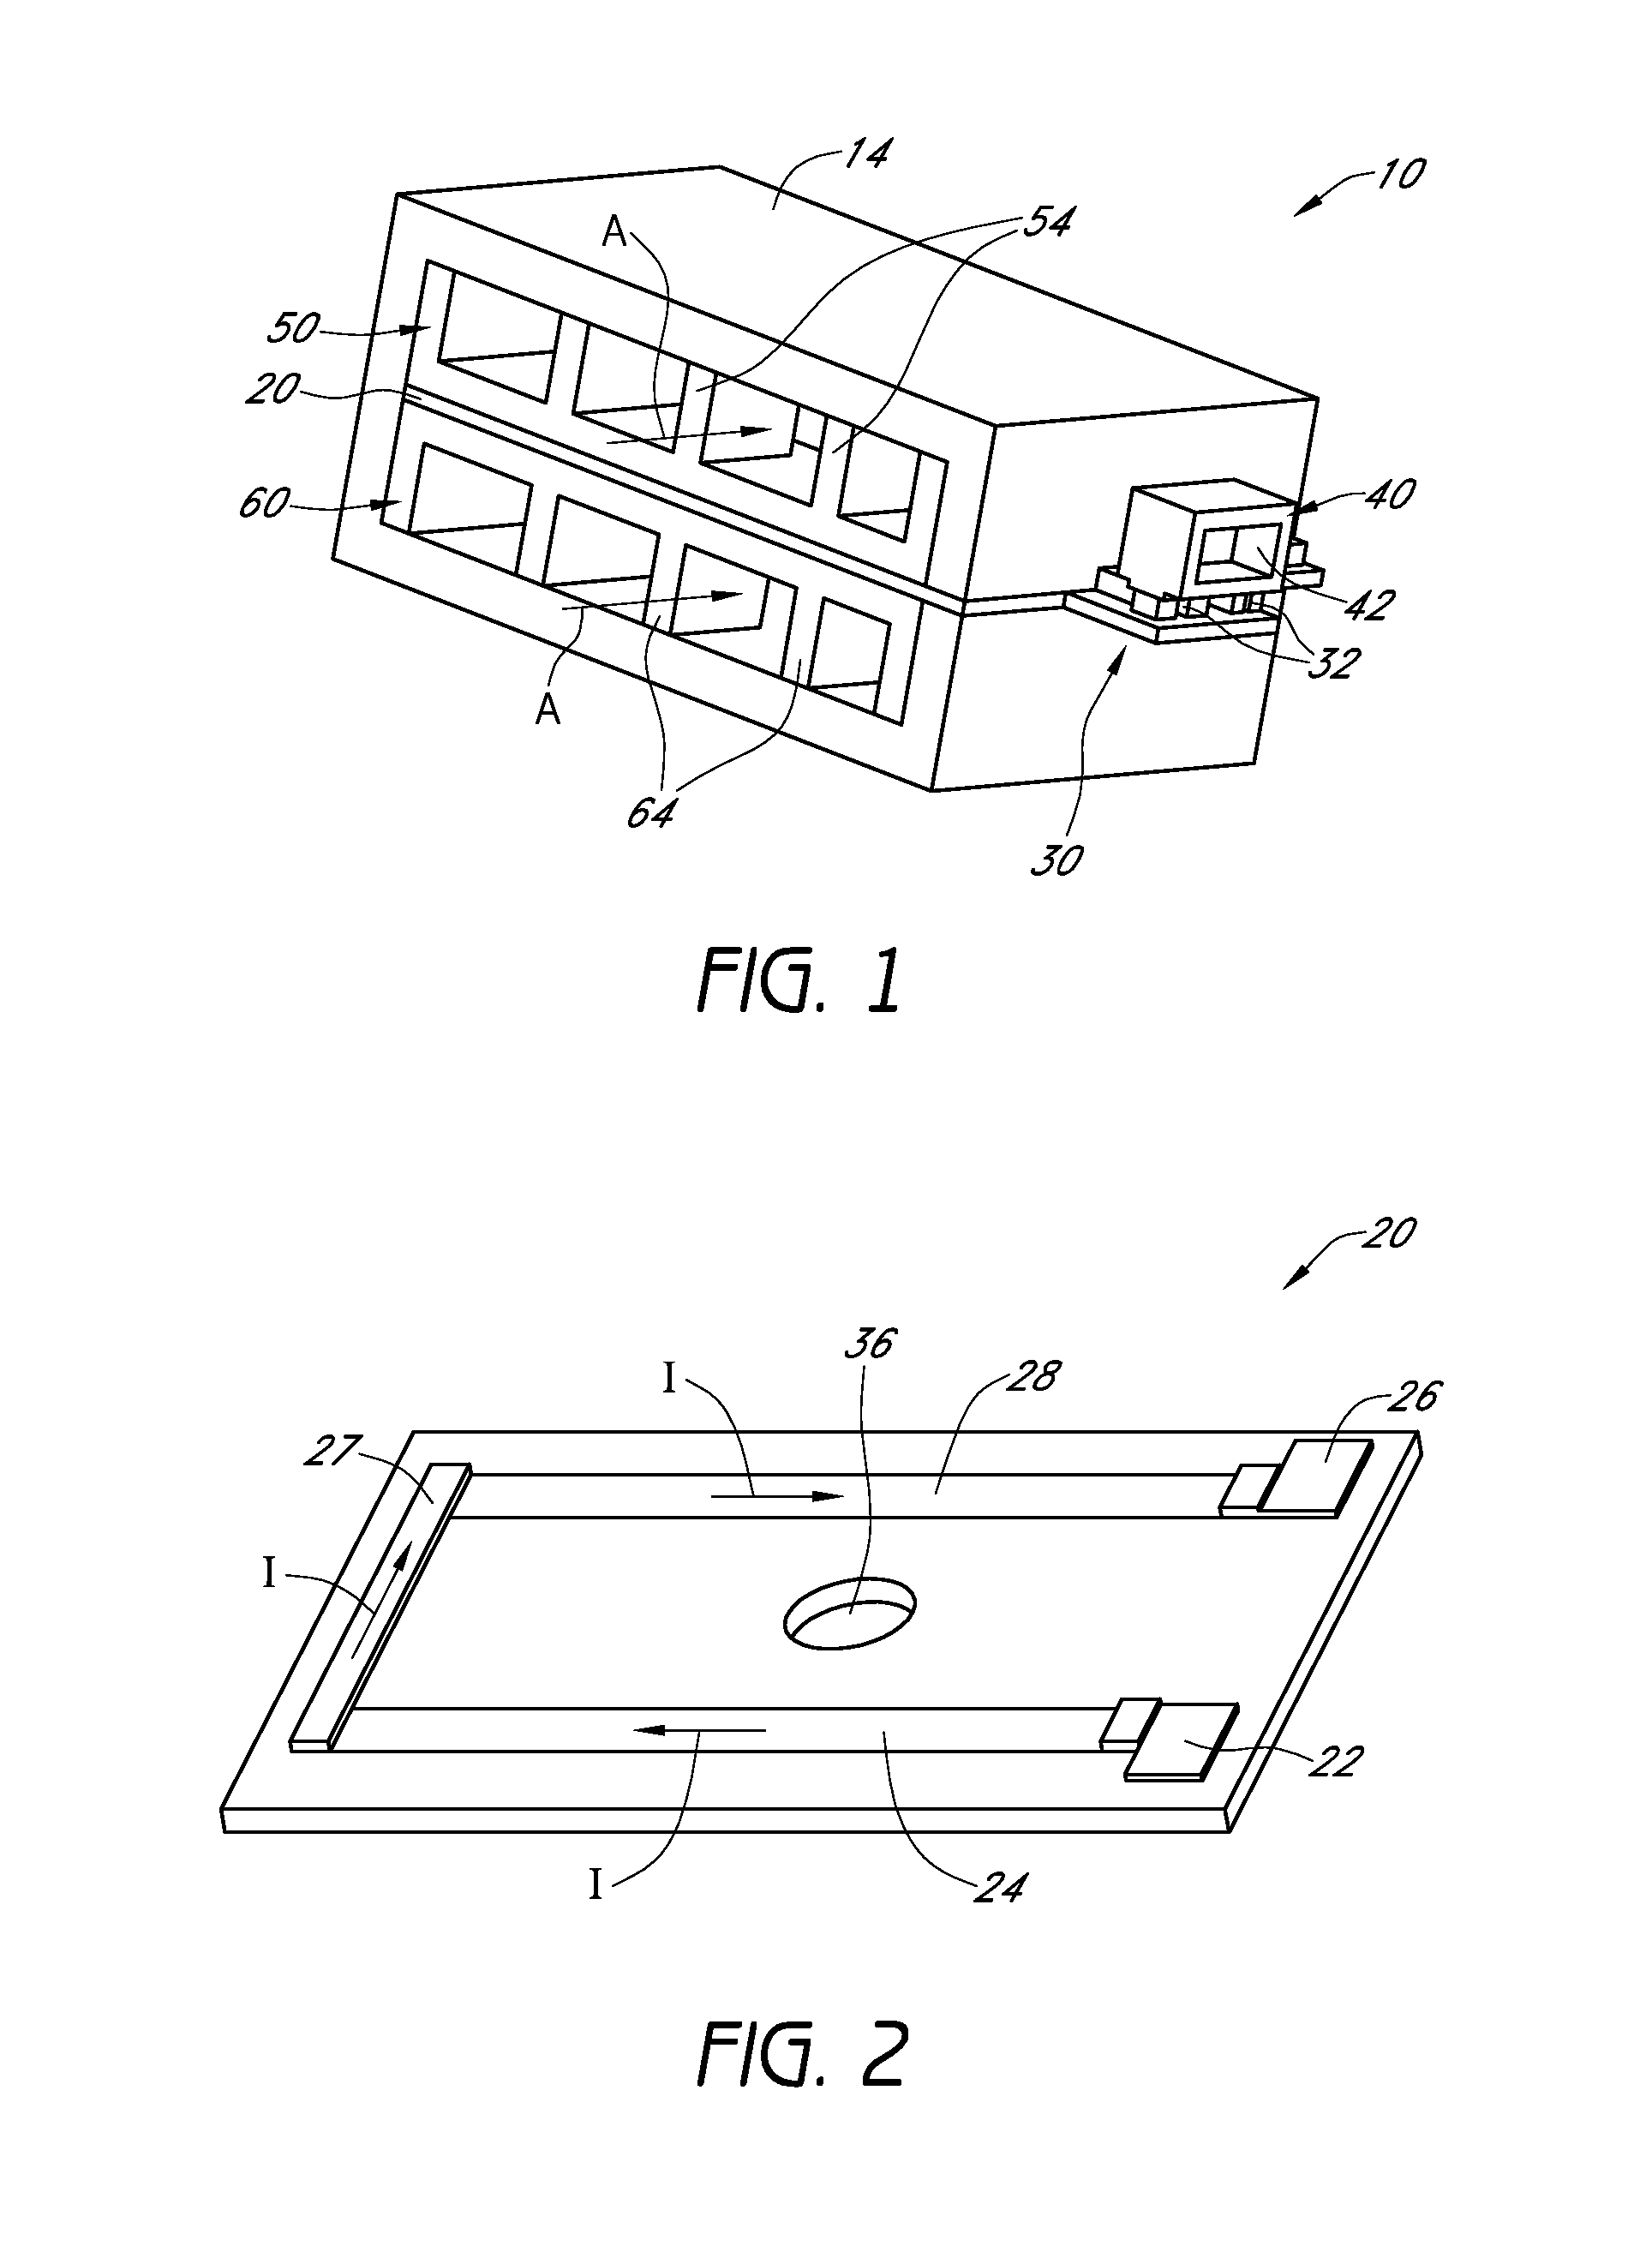 Convective heating device